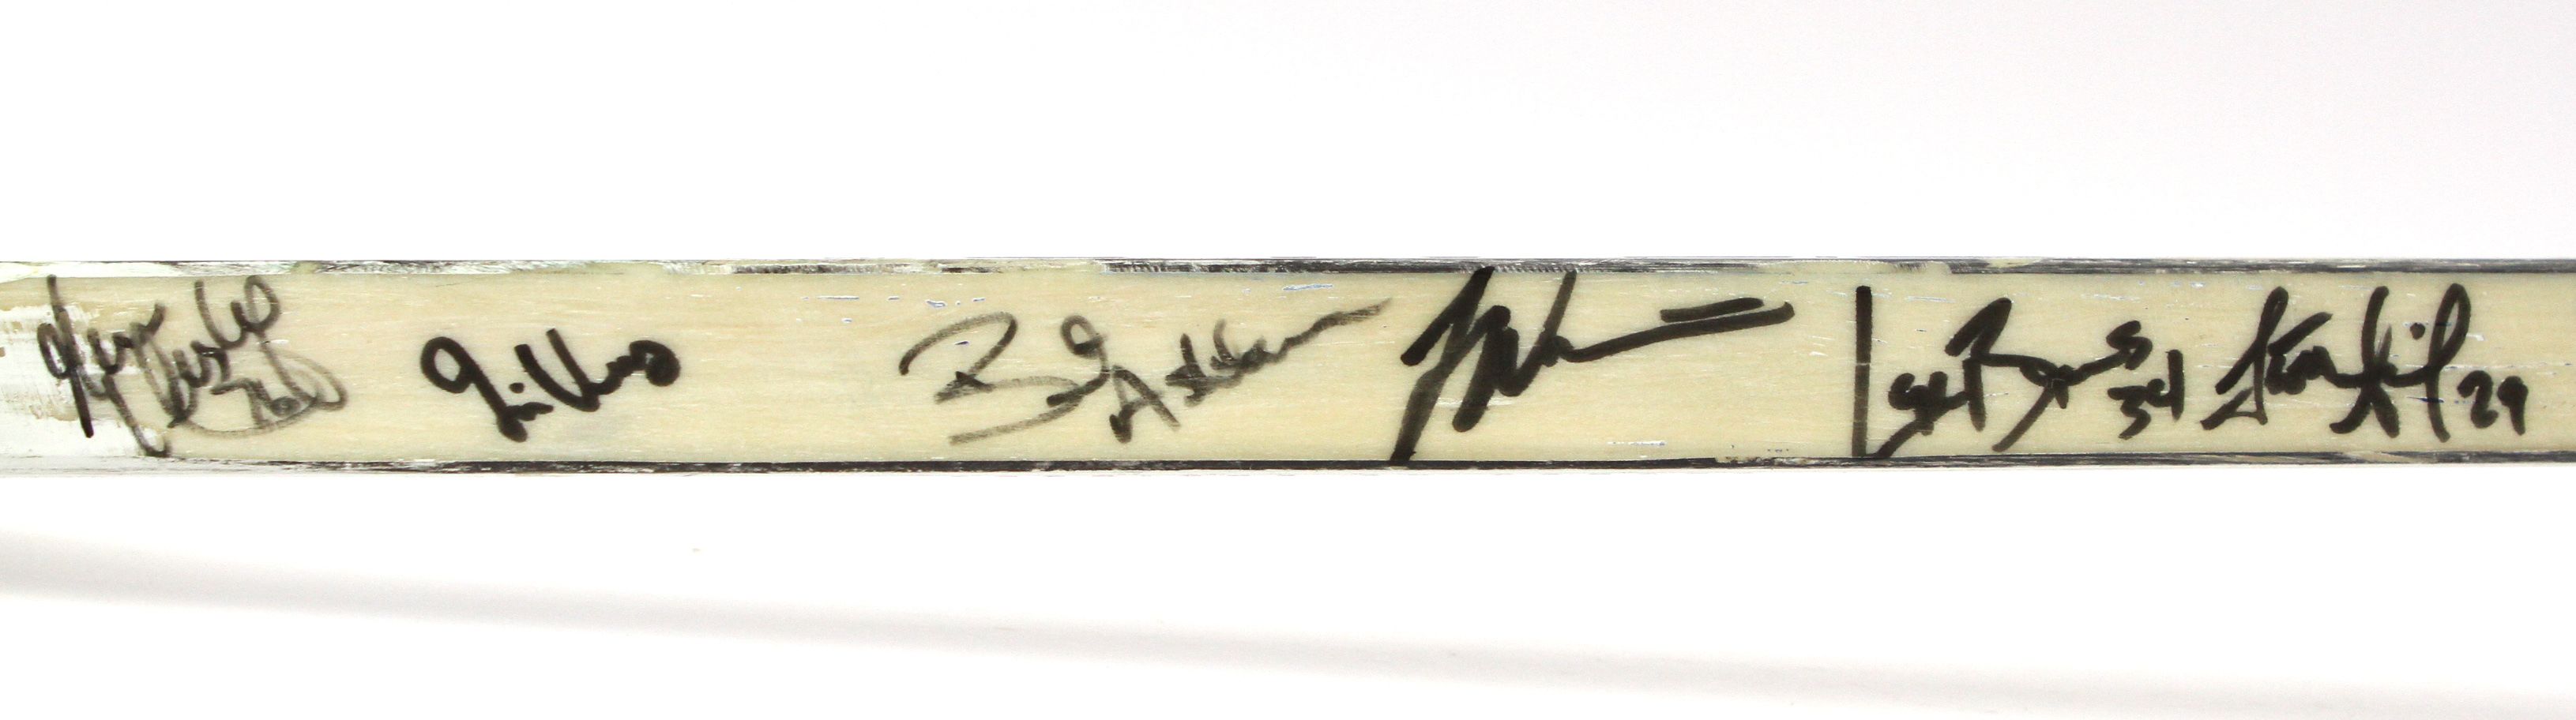 Bobby Orr Signed Hockey Stick. Hockey Collectibles Others, Lot #44141